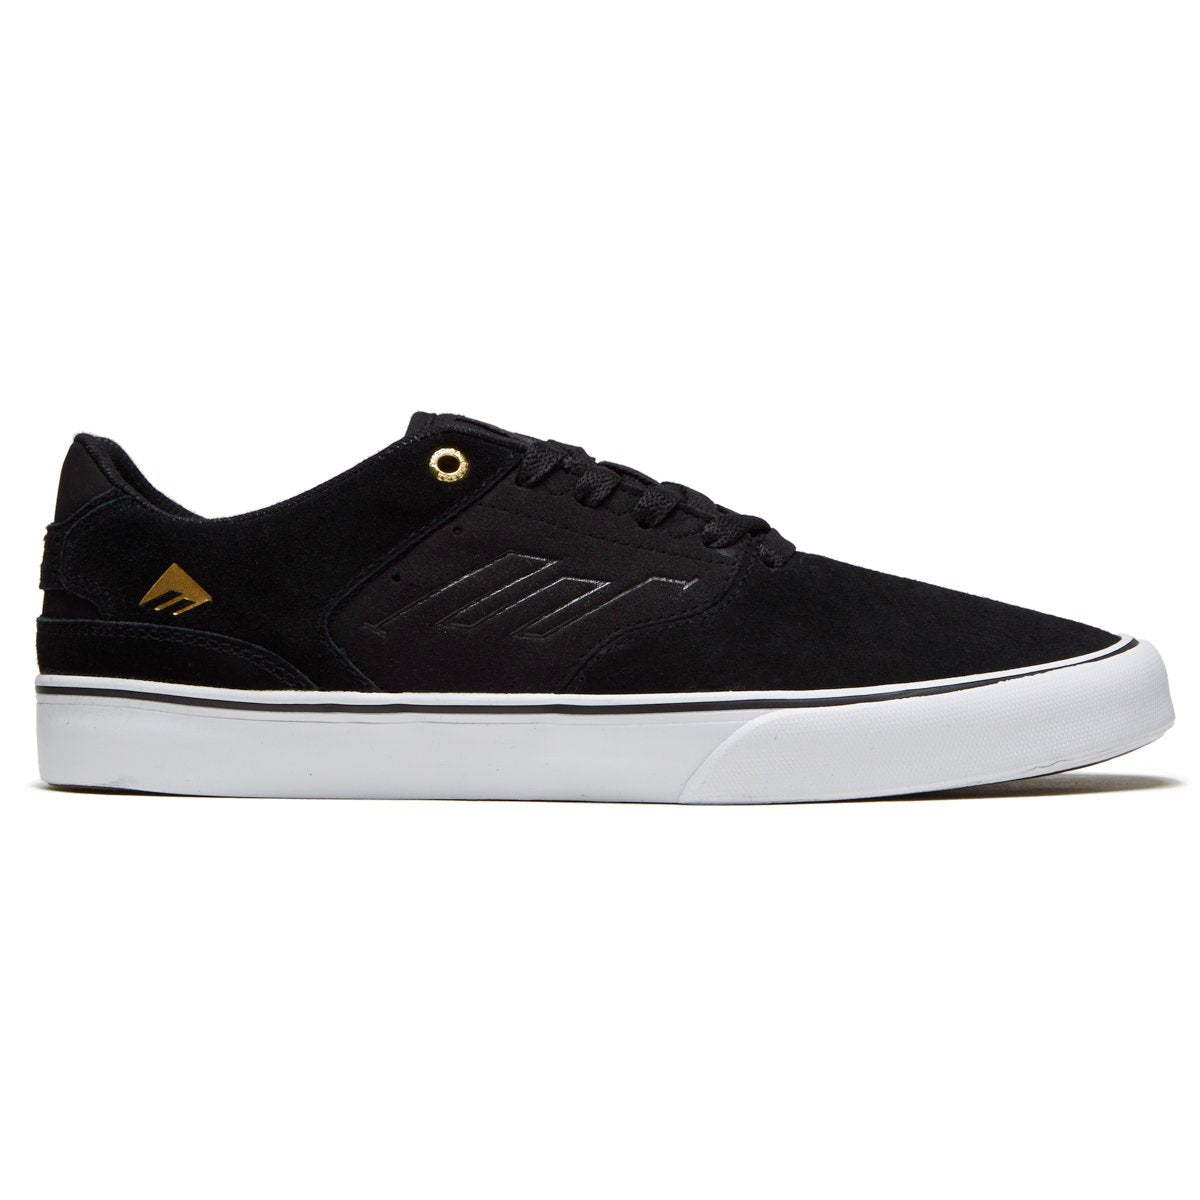 Emerica The Low Vulc Shoes - Black/Gold/White image 1